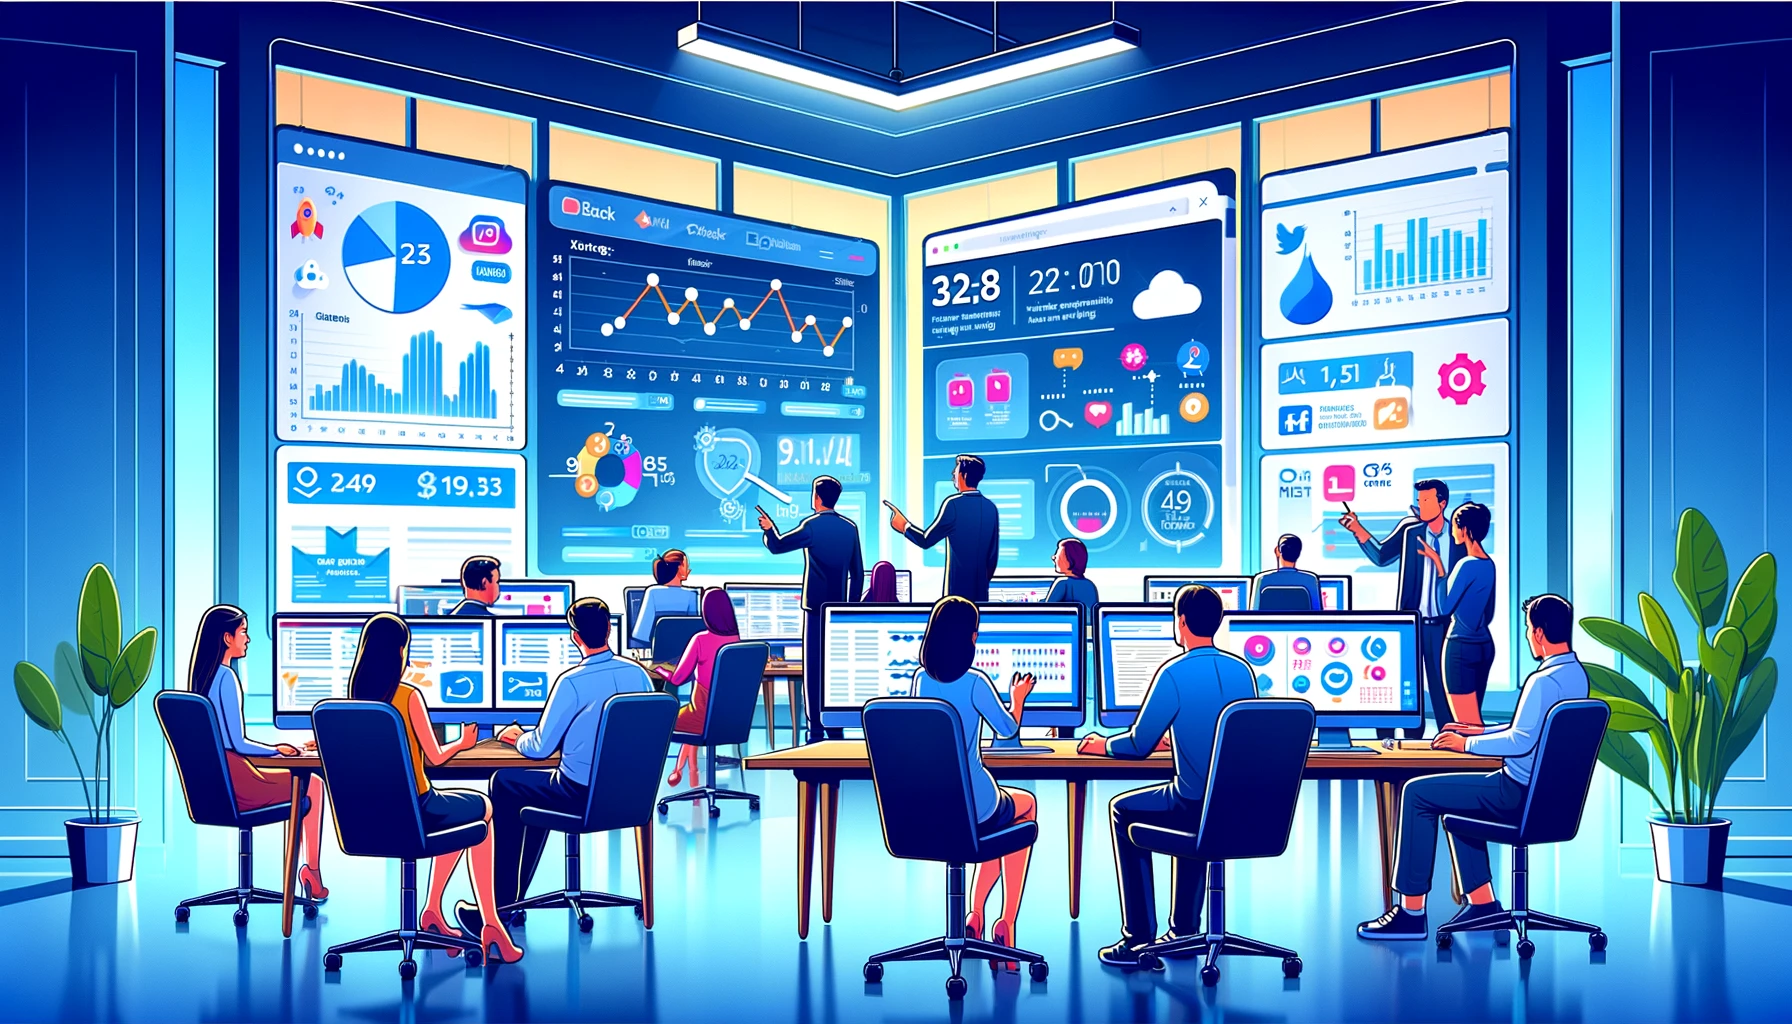 Illustration of a modern digital marketing office with a diverse team of professionals analyzing website and social media analytics. The vibrant, cartoonish style scene depicts team members discussing engagement metrics and data from multiple high-tech workstations, emphasizing the role of data analysis in successful rebranding strategies.